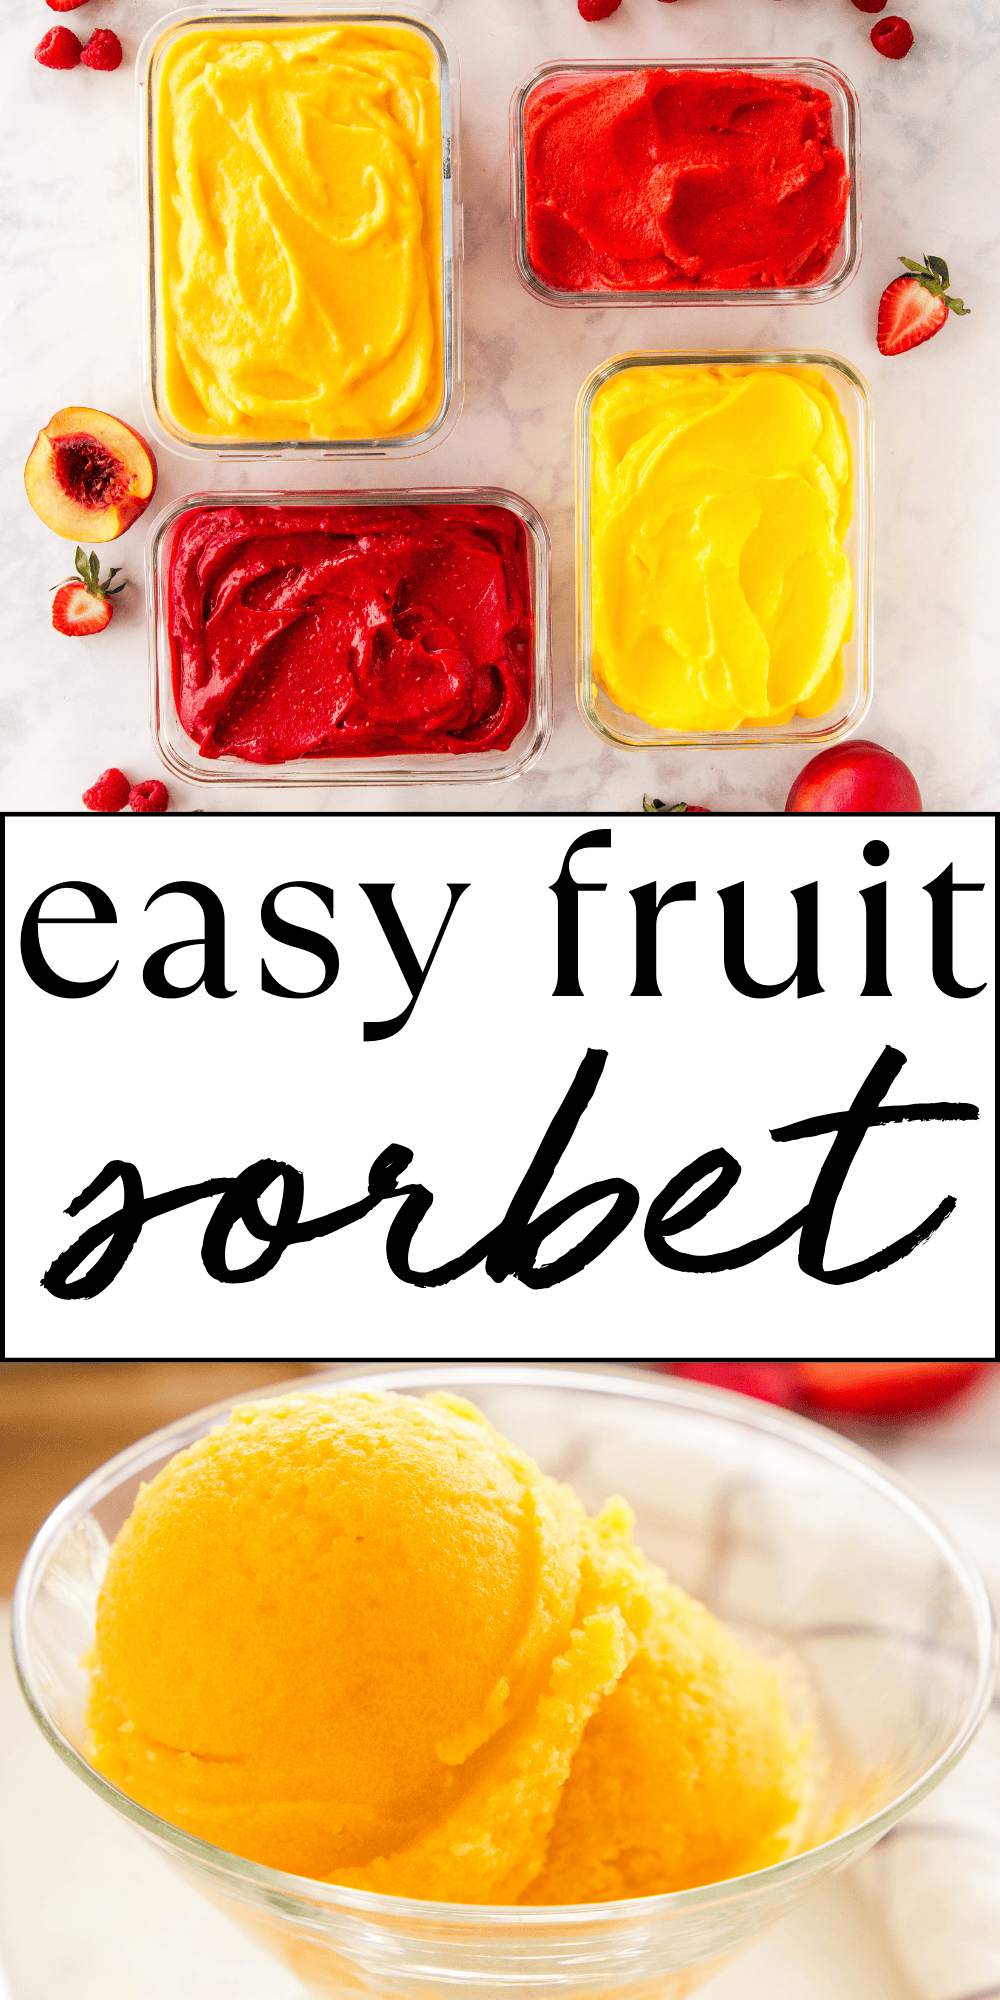 This Sorbet recipe is the ultimate guide to the PERFECT homemade sorbet made from only 2 ingredients! Learn how to make sorbet with fresh or frozen fruit, no ice cream maker required! Recipe from thebusybaker.ca! #sorbet #easysorbet #howtomakesorbet #2ingredientsorbet #homemadesorbet via @busybakerblog